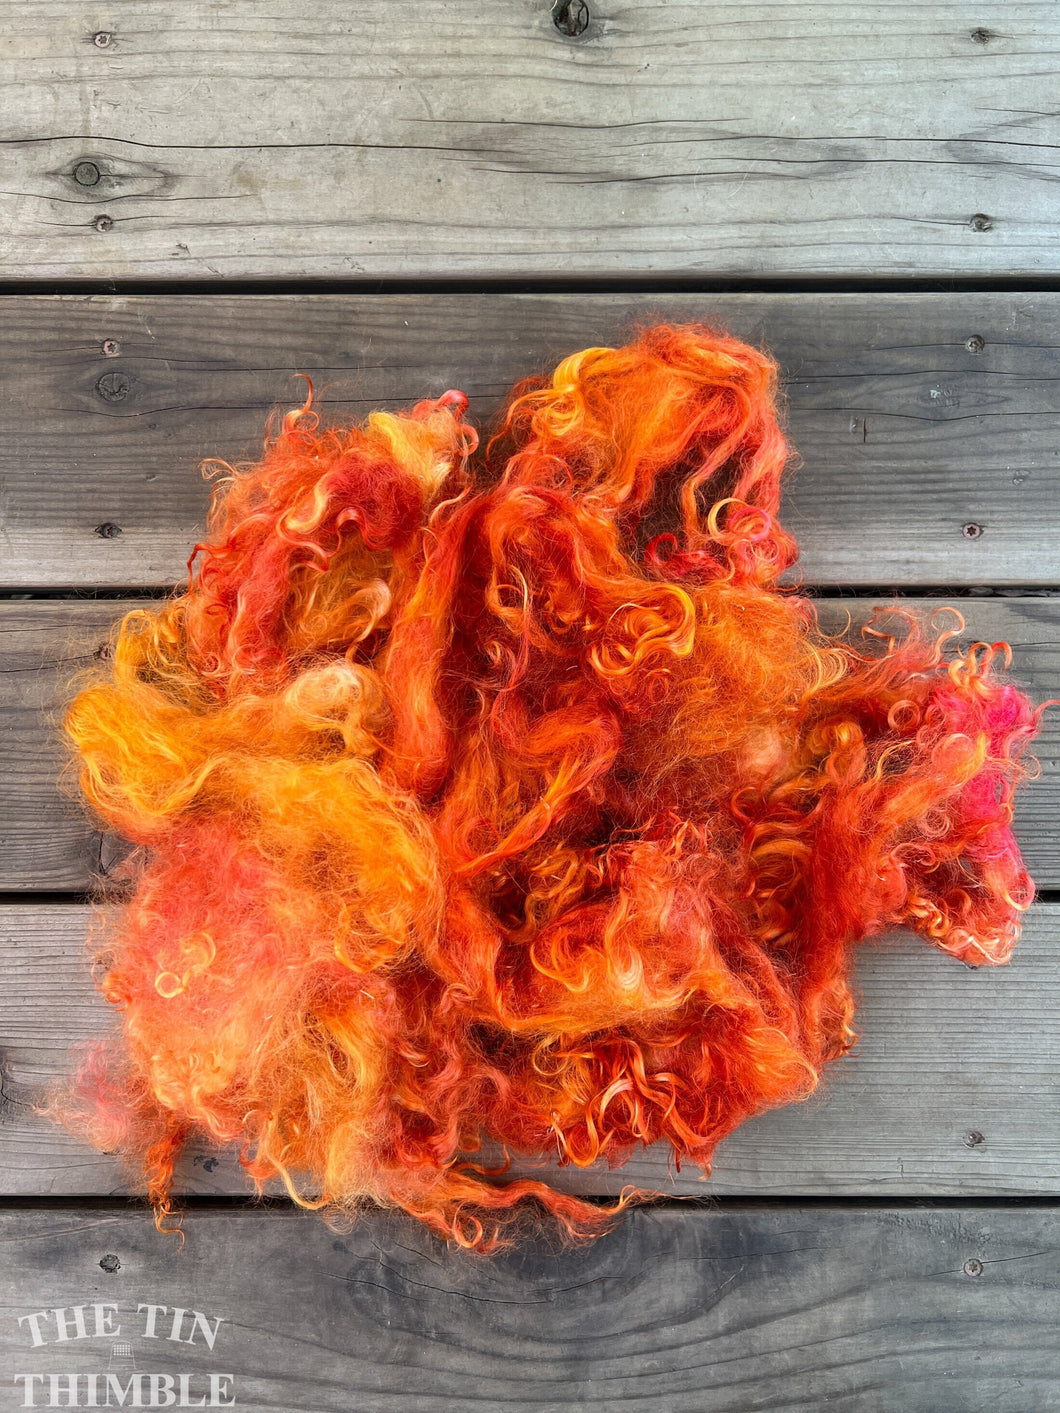 Adult Mohair Locks for Felting, Spinning or Weaving - 1/4 Oz - Hand Dyed in the Color 'Flame'